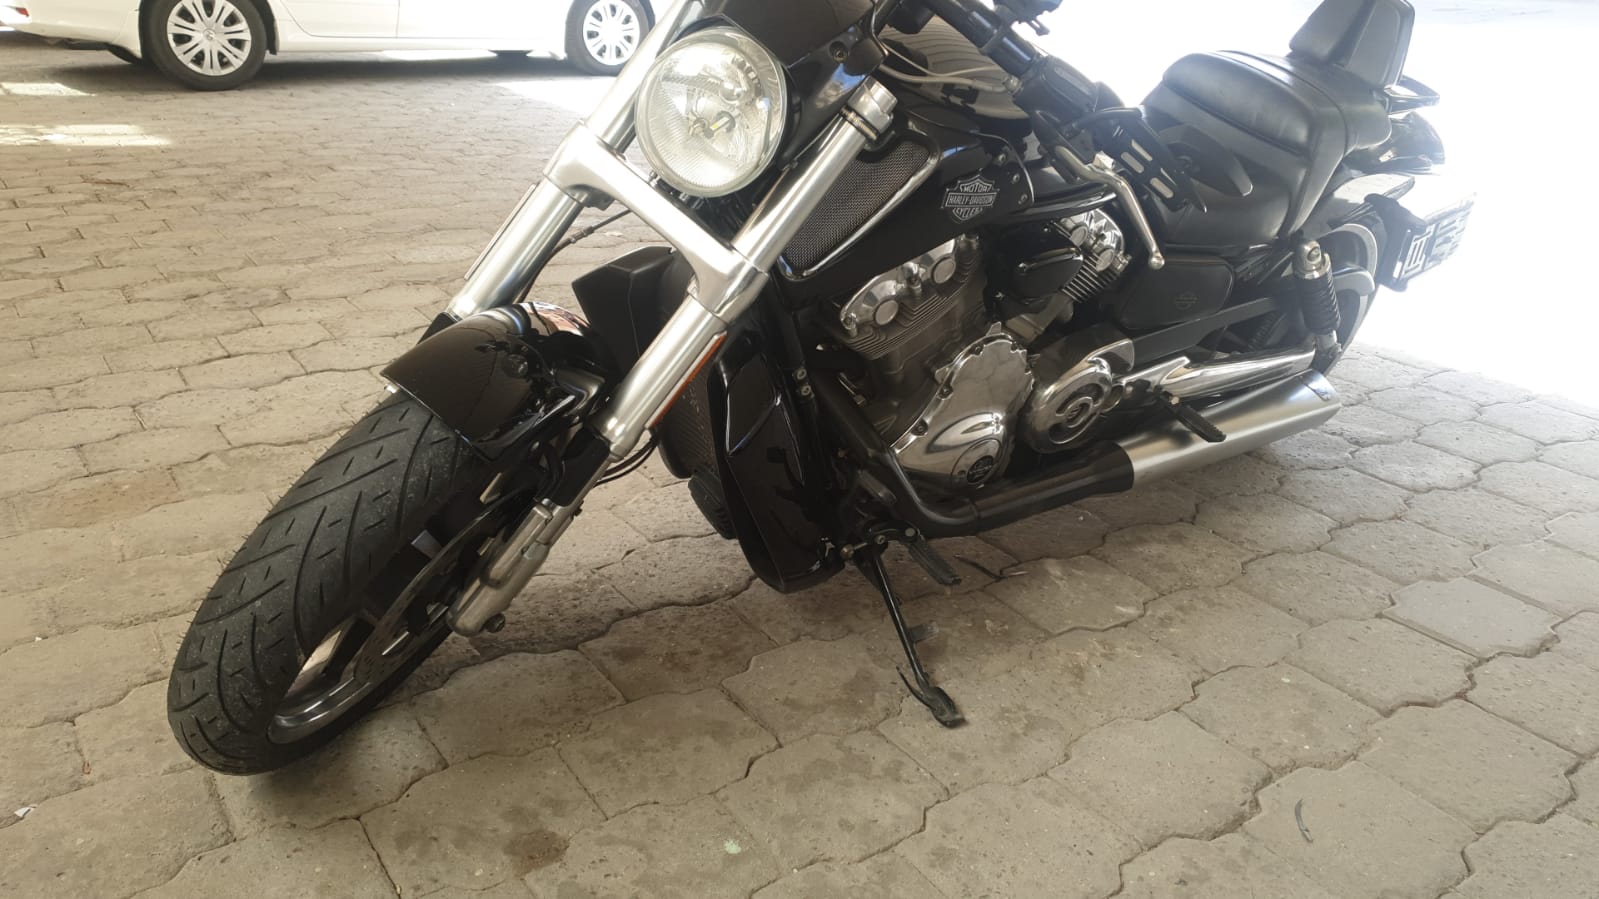 2012 Harley Davidson VROD MUSCLE Excellent condition